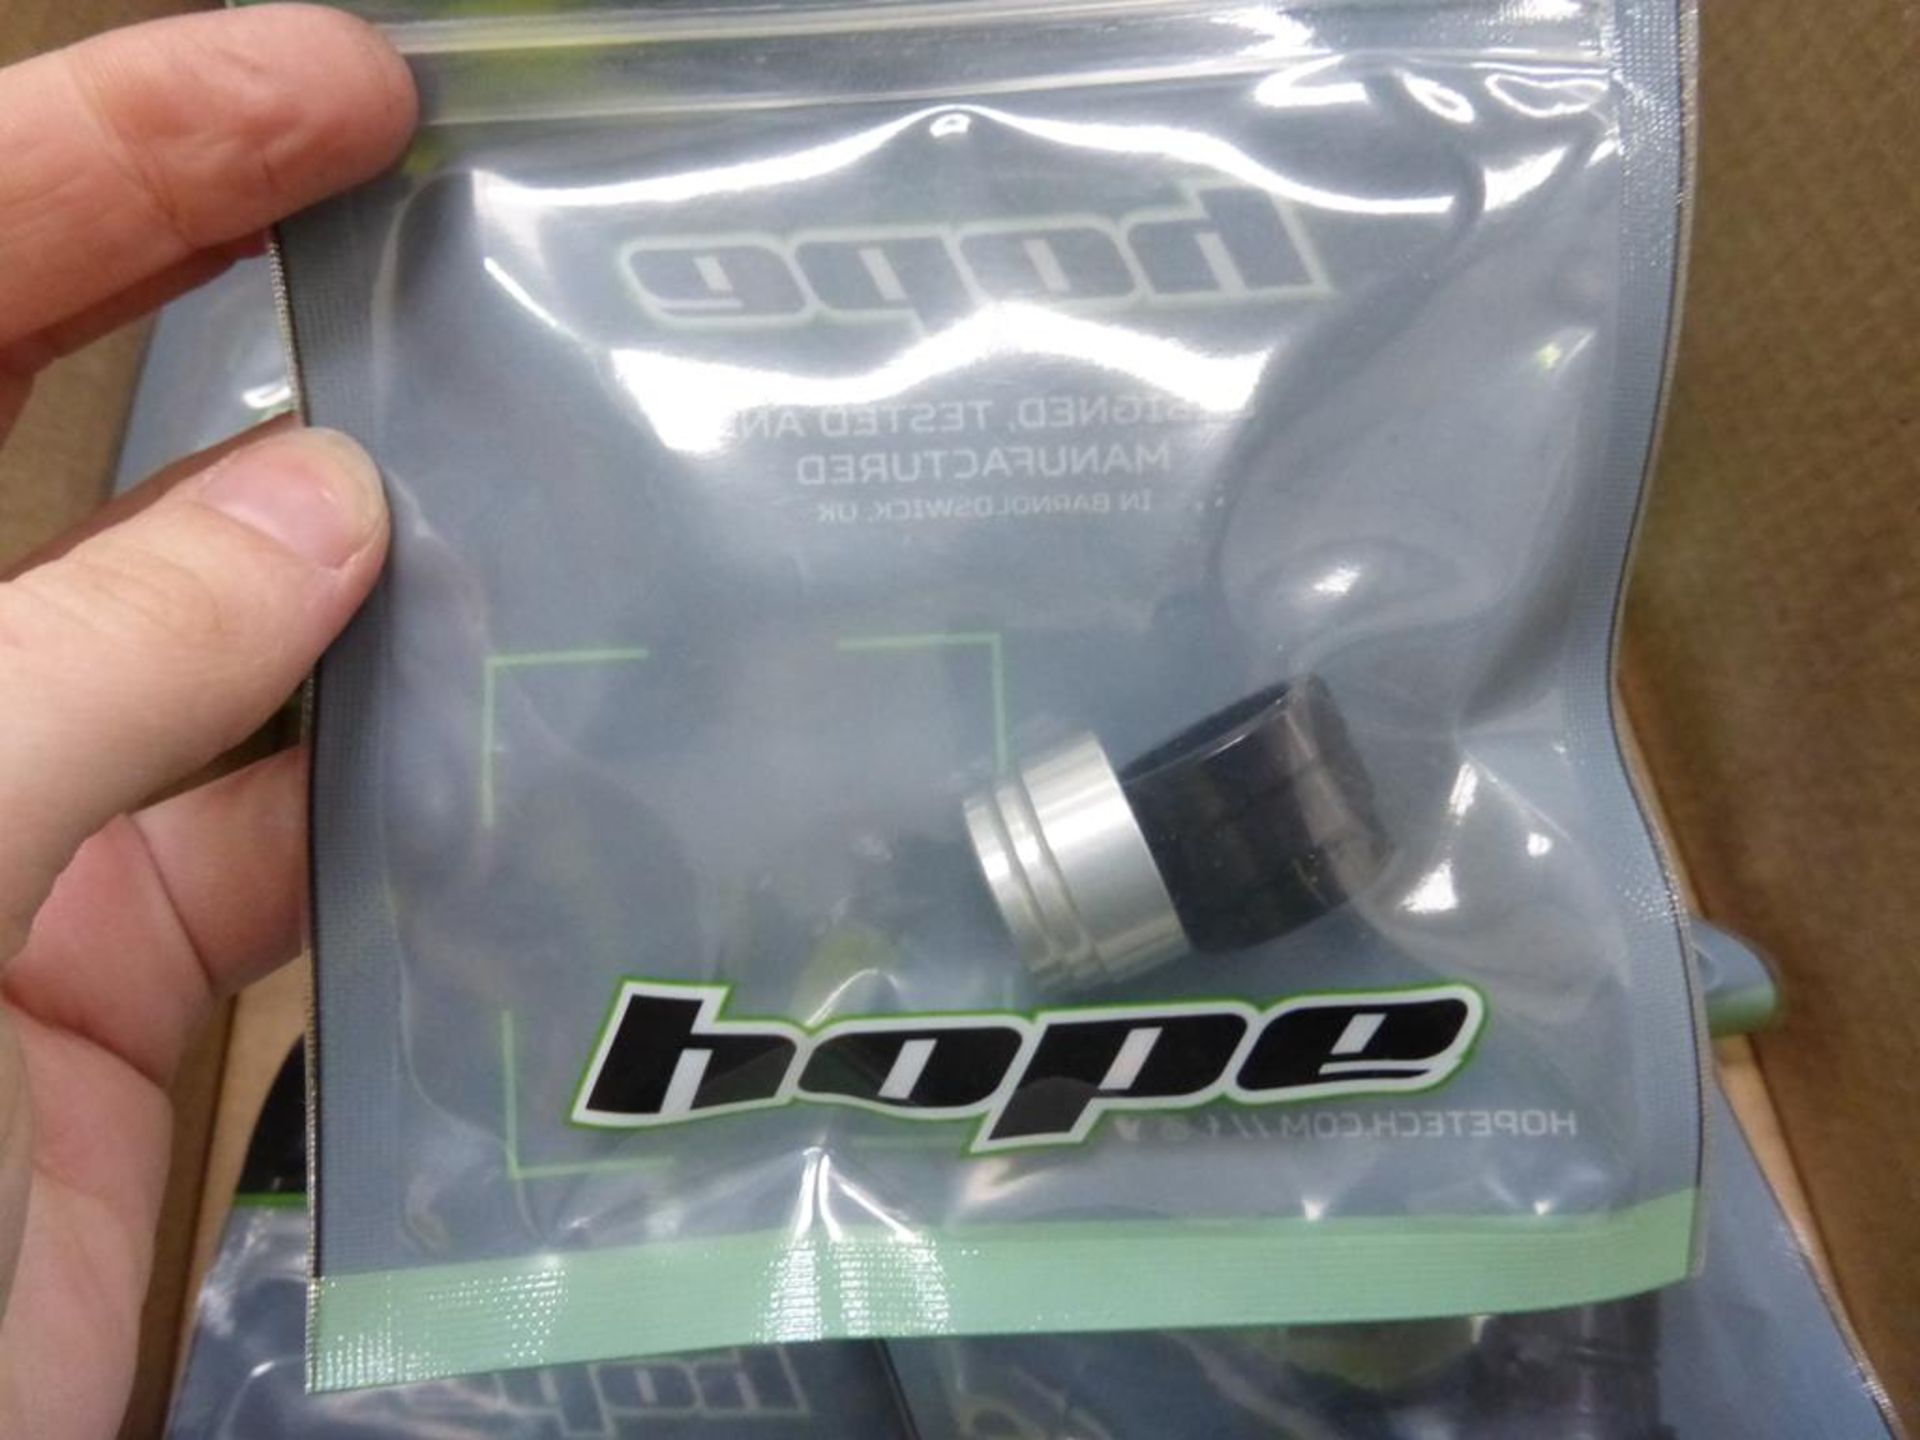 New, Hope Cycle Components - Image 8 of 10